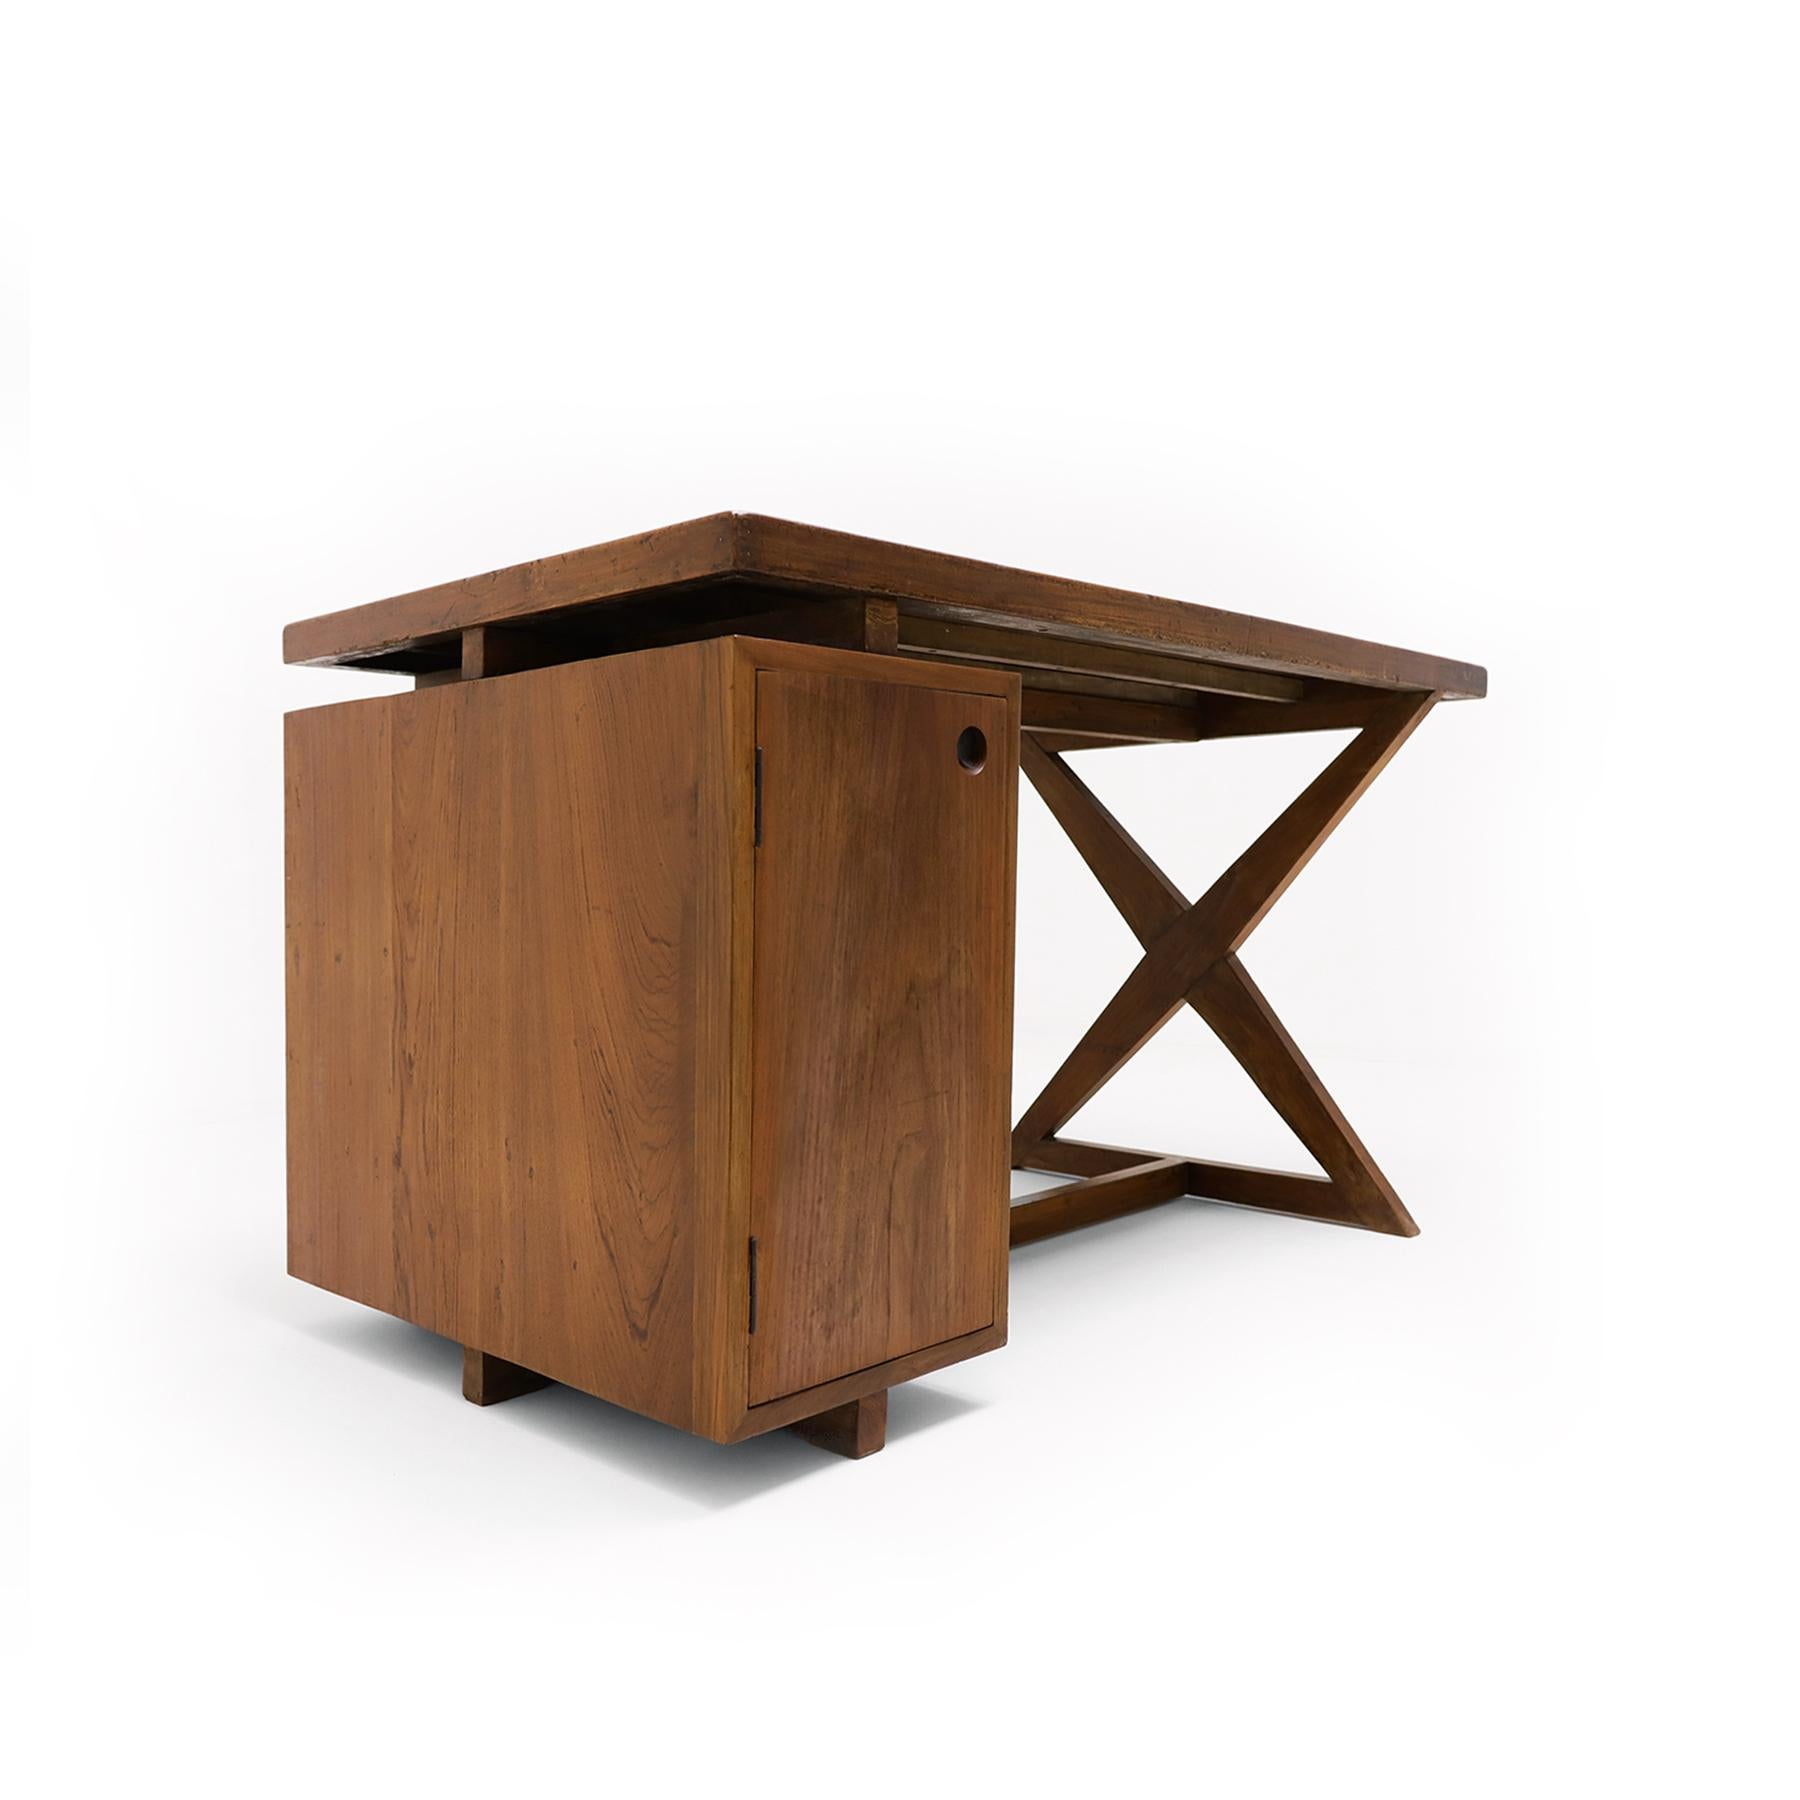 Pierre Jeanneret  X desk with a Model Pj Si 30A Committee Chair, Chandigarh, 60s For Sale 1